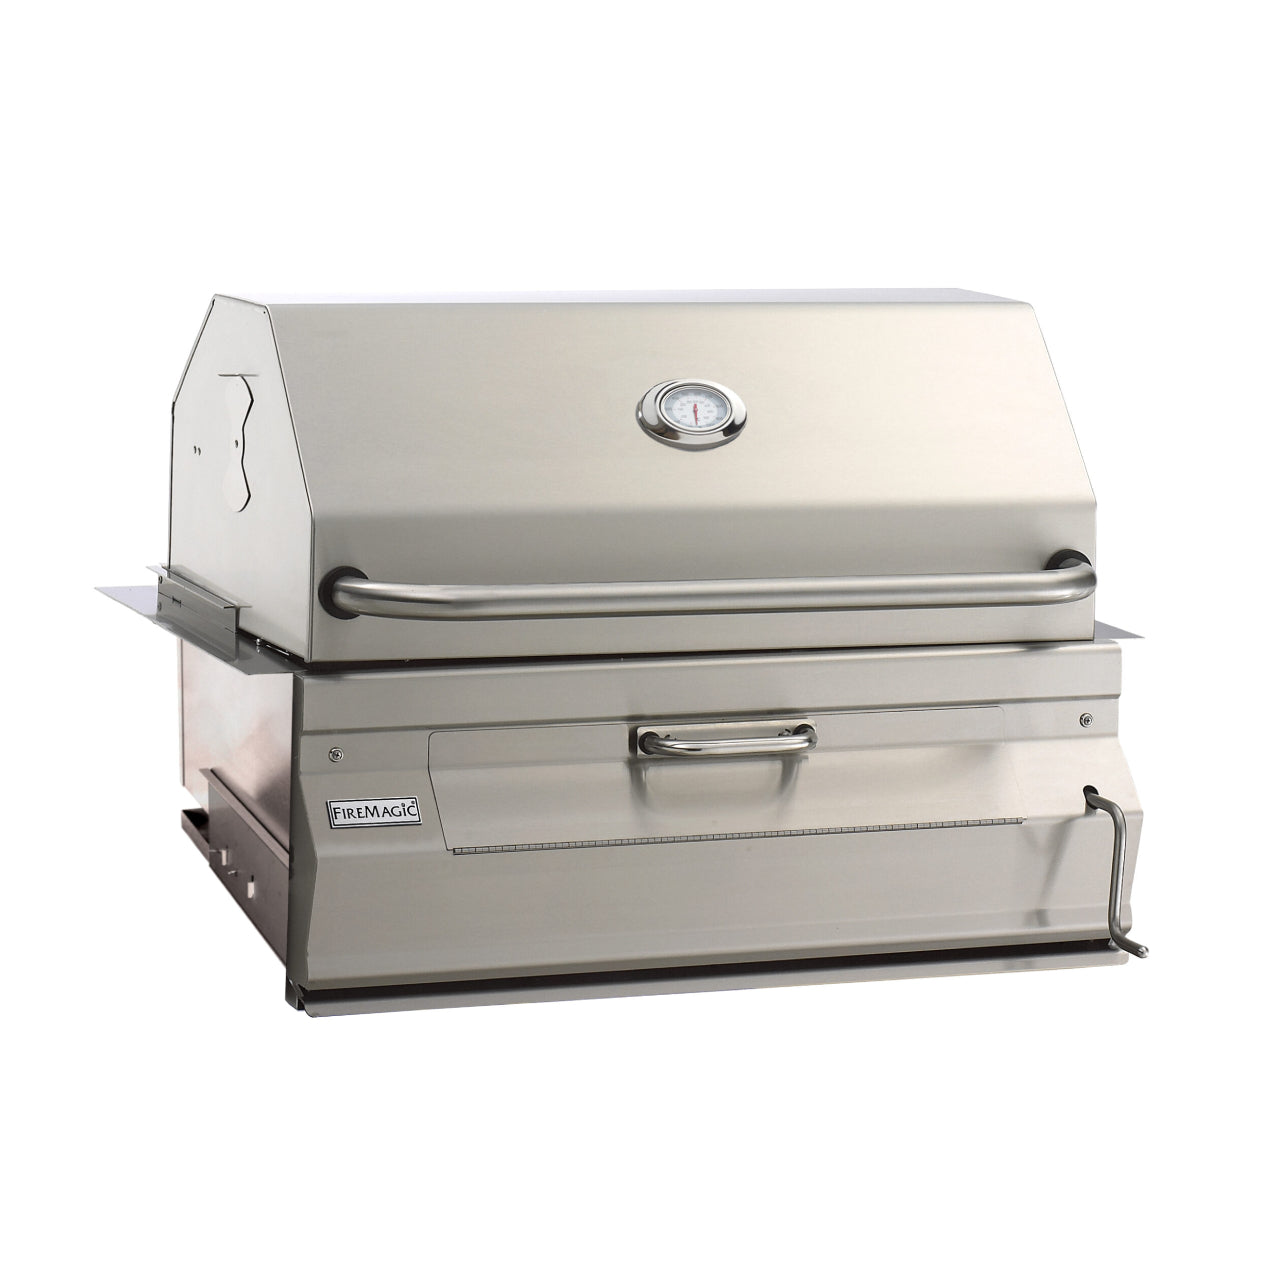 FireMagic 30" Built-In Charcoal Grill 14-SC01C-A